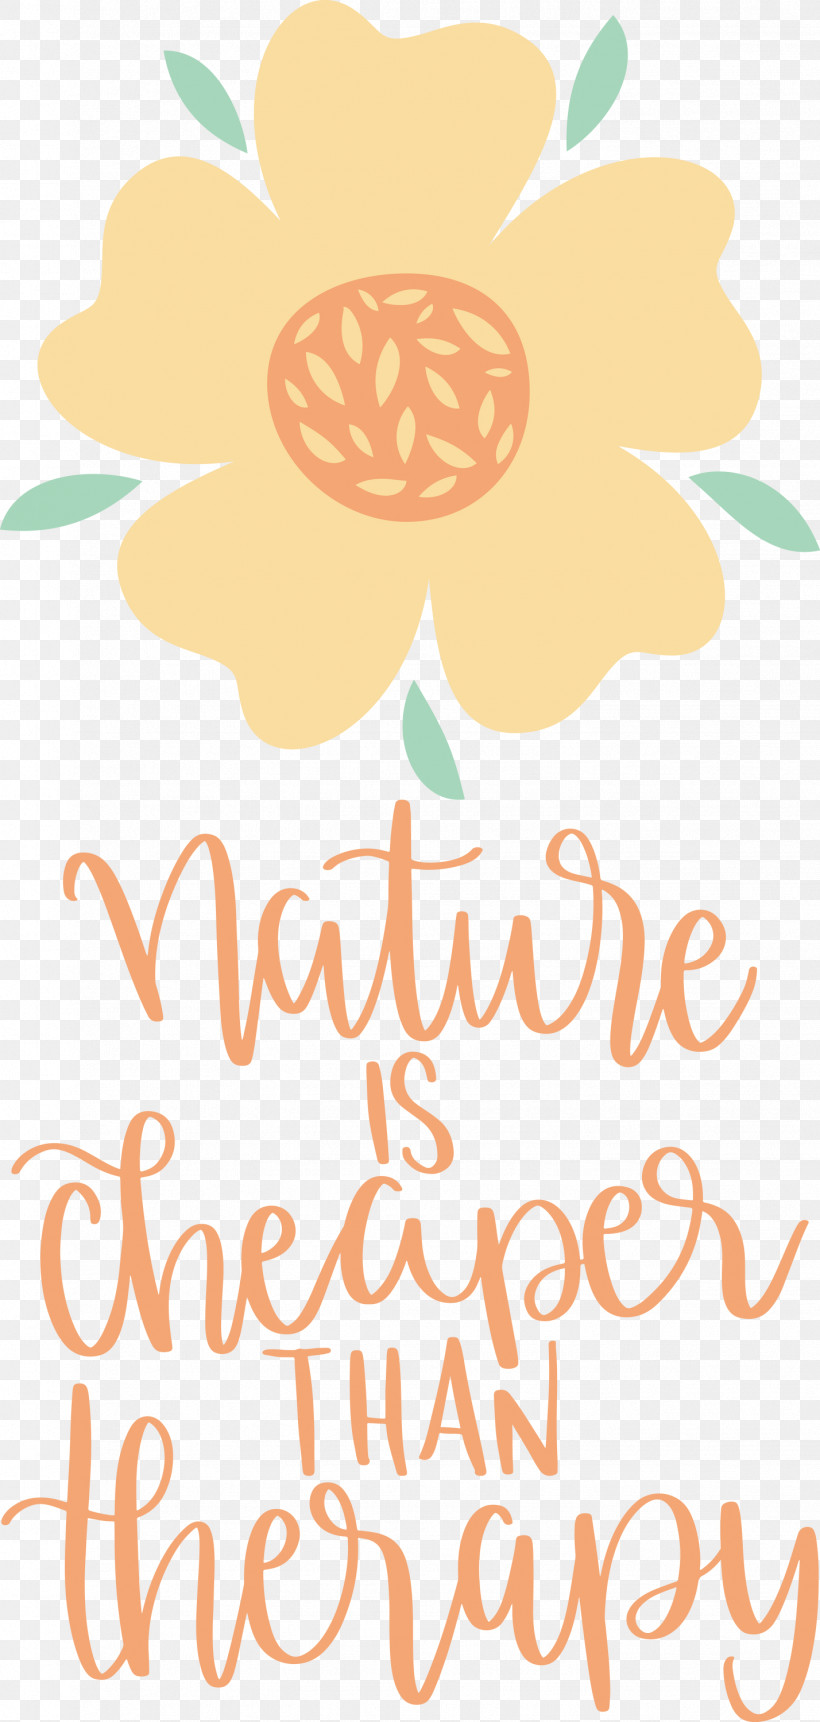 Nature Is Cheaper Than Therapy Nature, PNG, 1428x2999px, Nature, Cut Flowers, Floral Design, Flower, Happiness Download Free